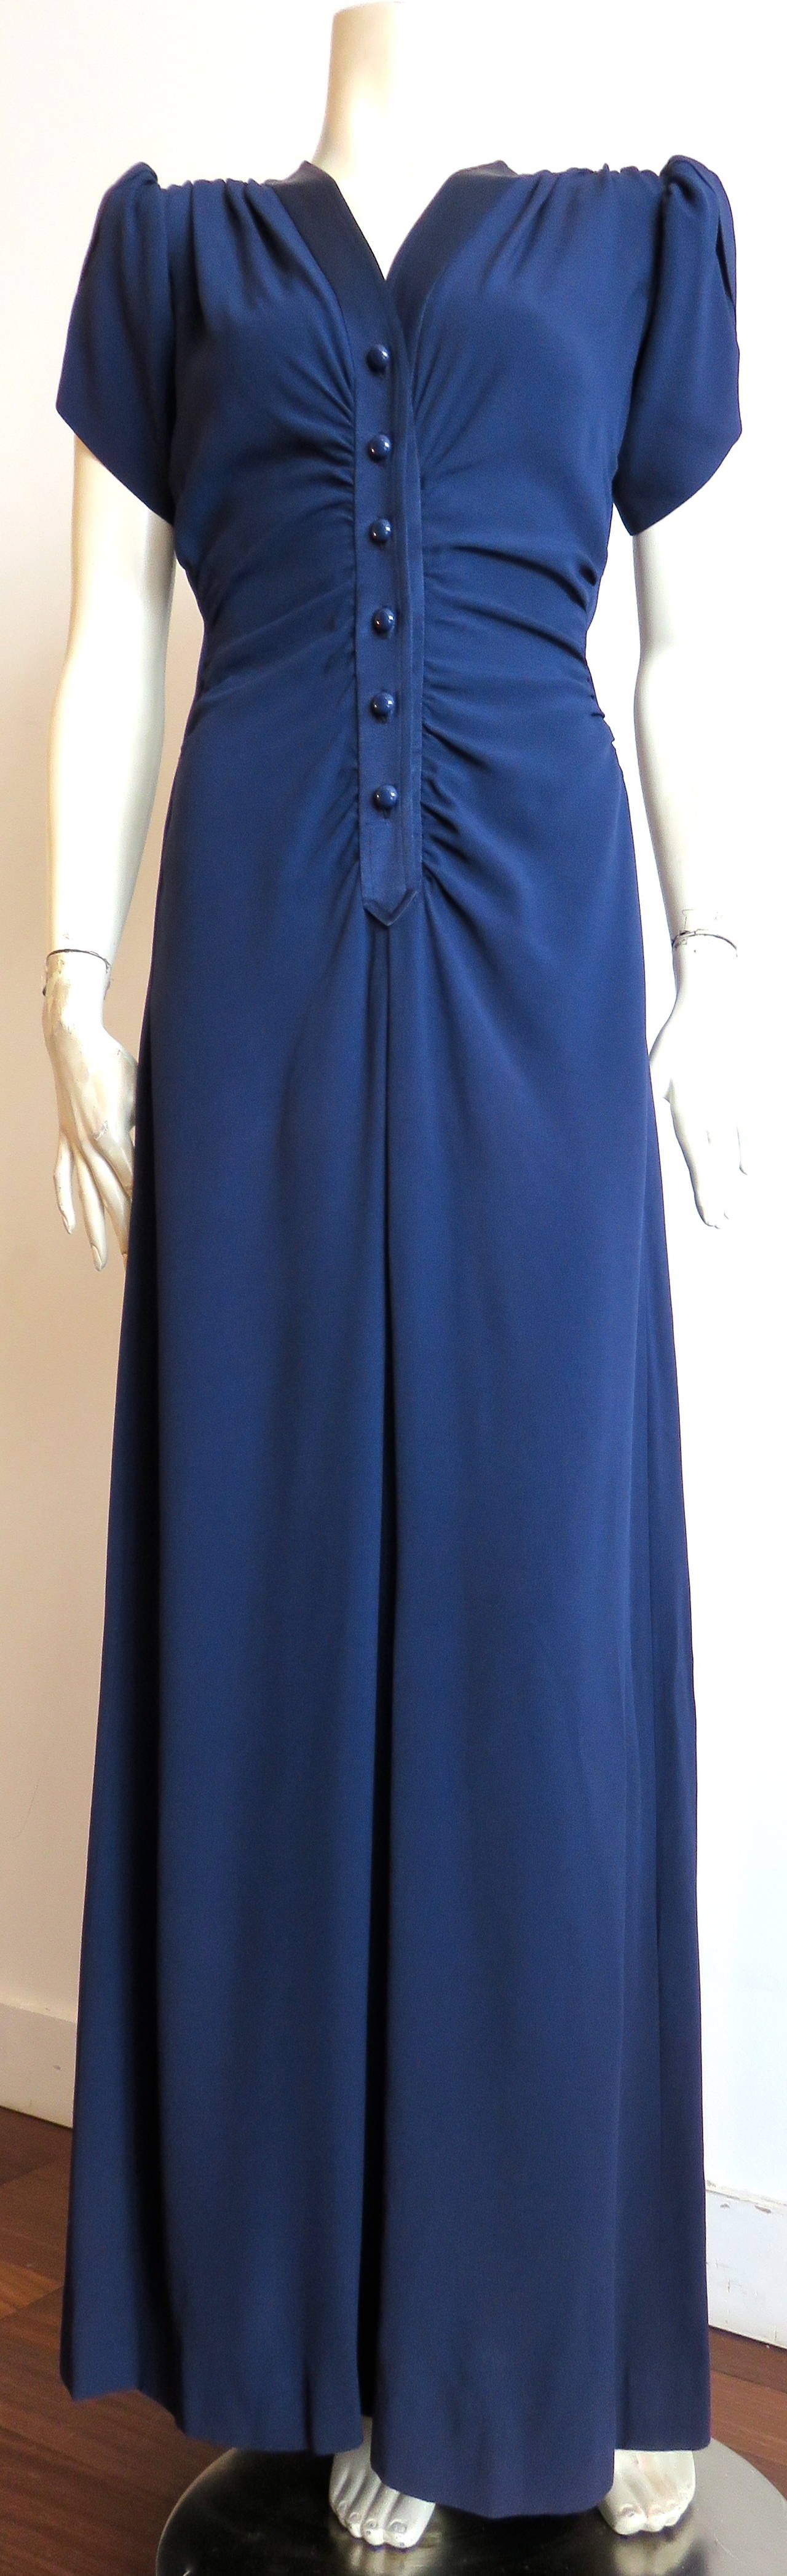 Stunning, 1983 YVES SAINT LAURENT 40's style blue crepe dress.

Mr. Saint Laurent was inspired by the 1940's film 'Gilda' for his 1983 Spring/Summer couture collection.  
 
This classic, 1940's inspired day dress of the same year/season features